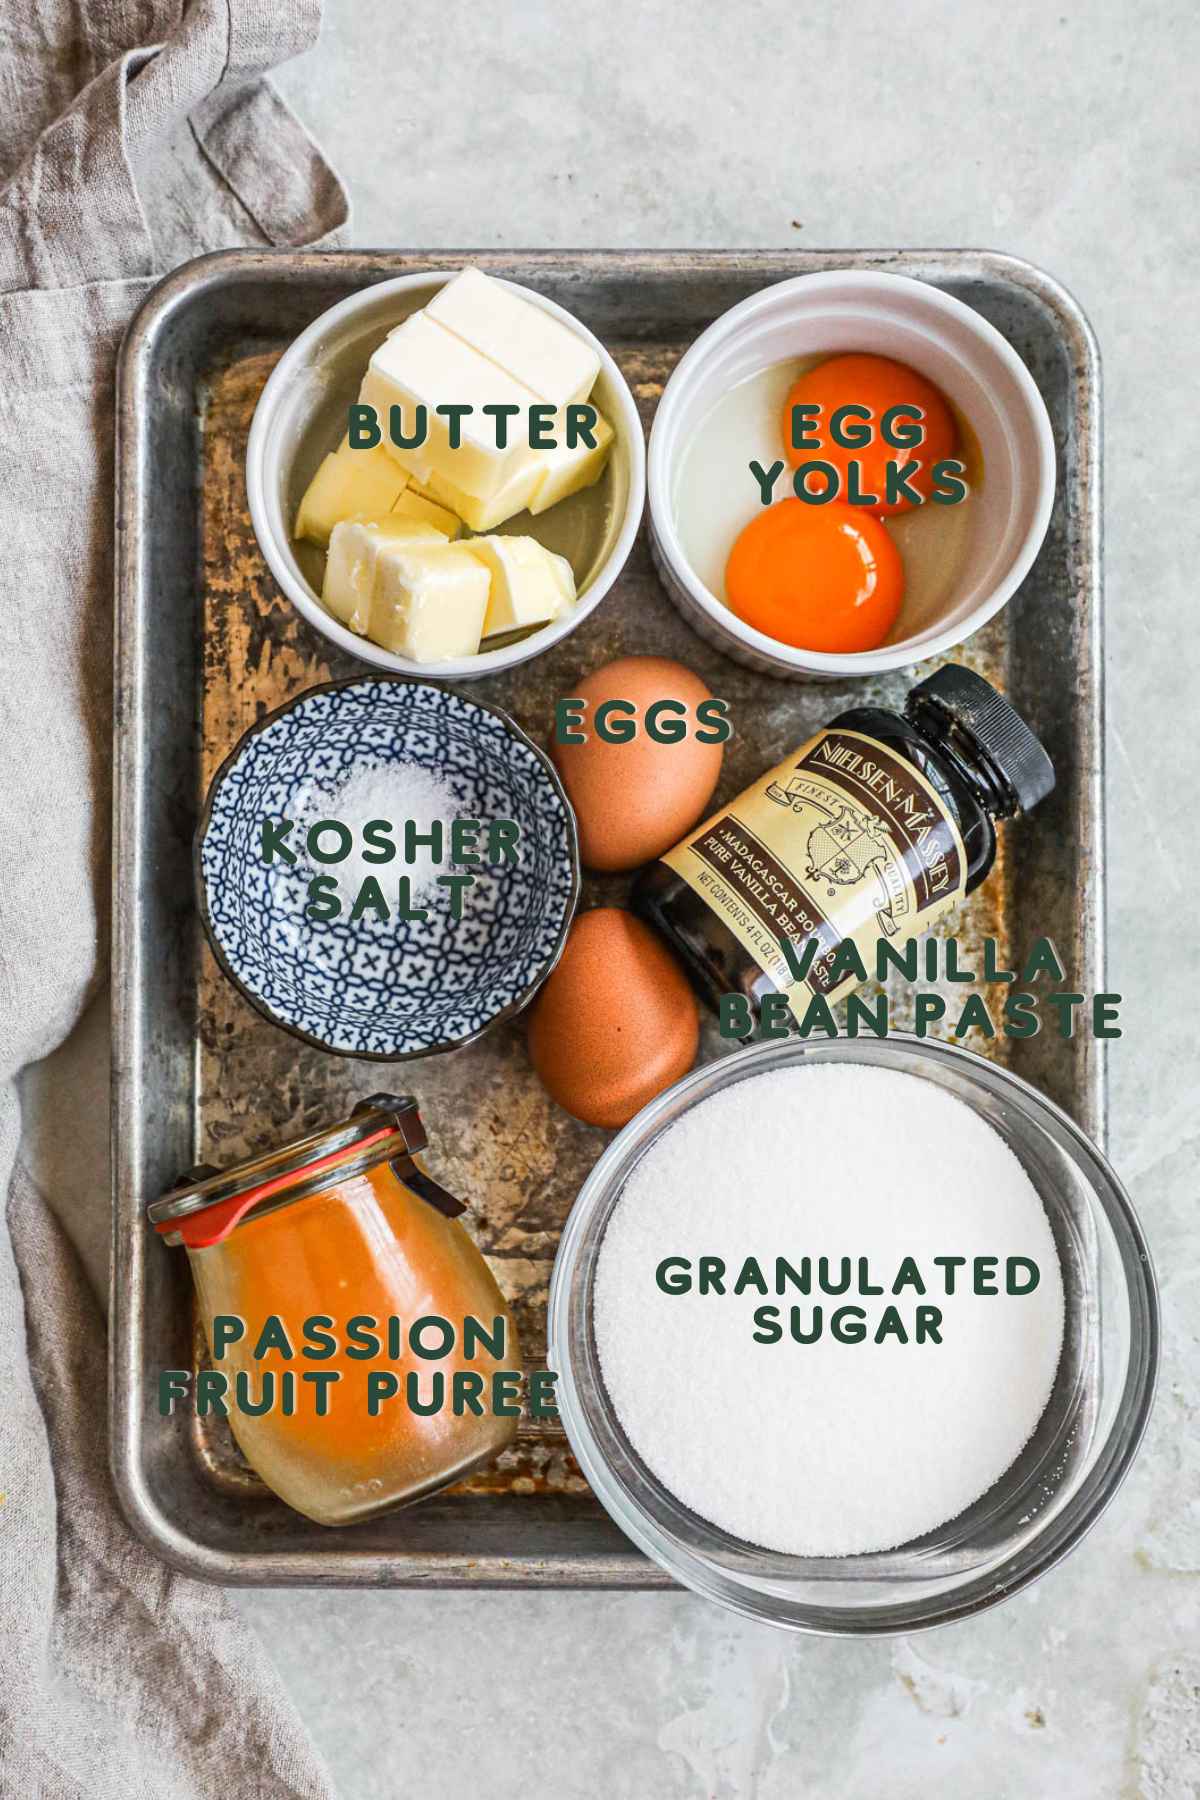 Ingredients for passion fruit curd (lilikoi butter), passion fruit puree, butter, eggs and yolks, vanilla bean paste, kosher salt, granulated sugar.